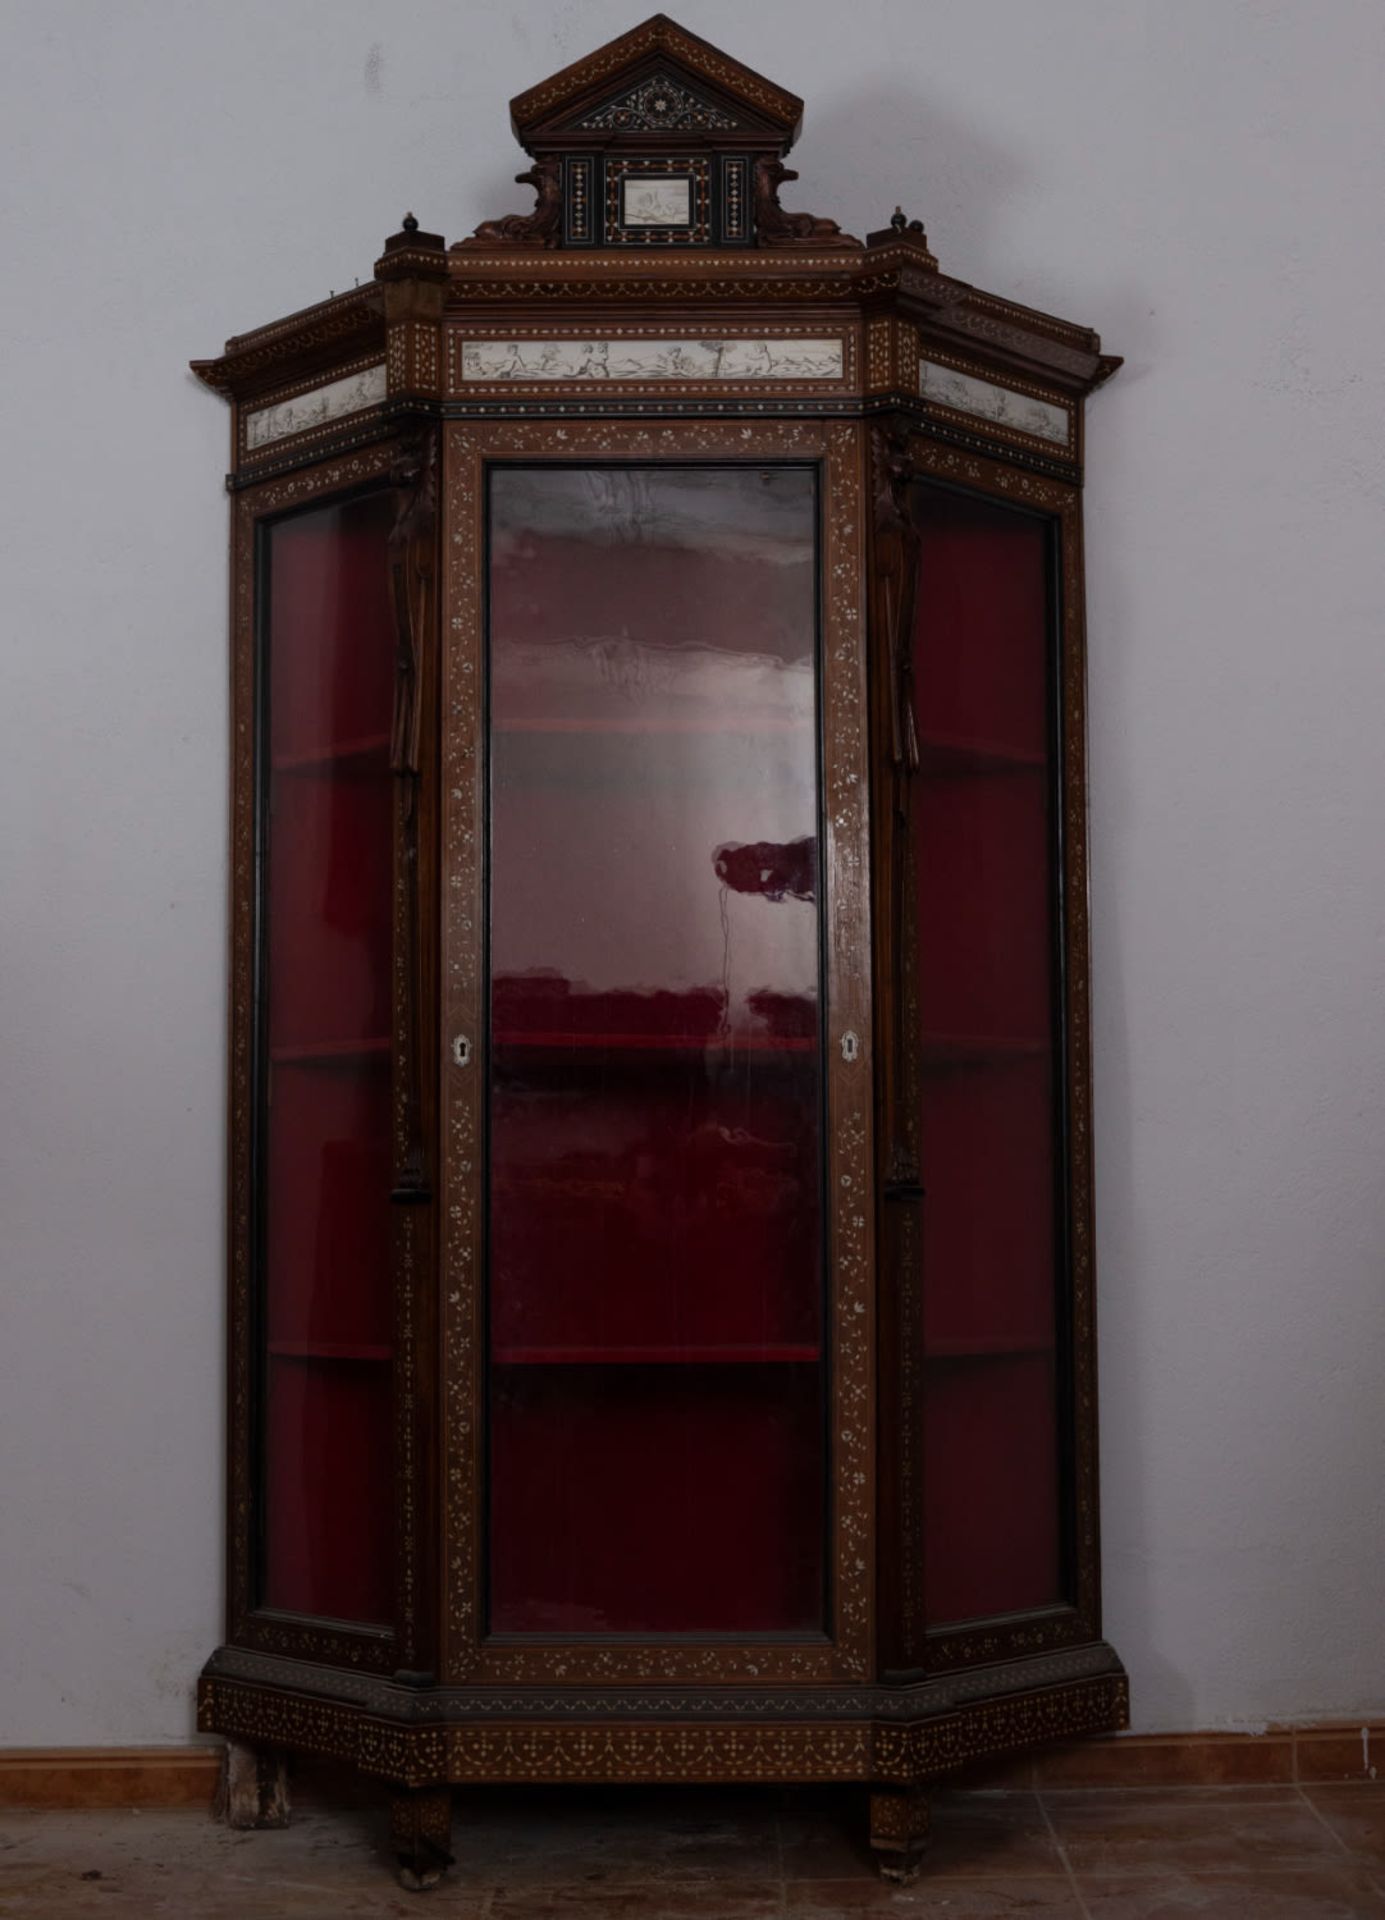 Bone inlaid display case, possibly 19th century French or Venetian work